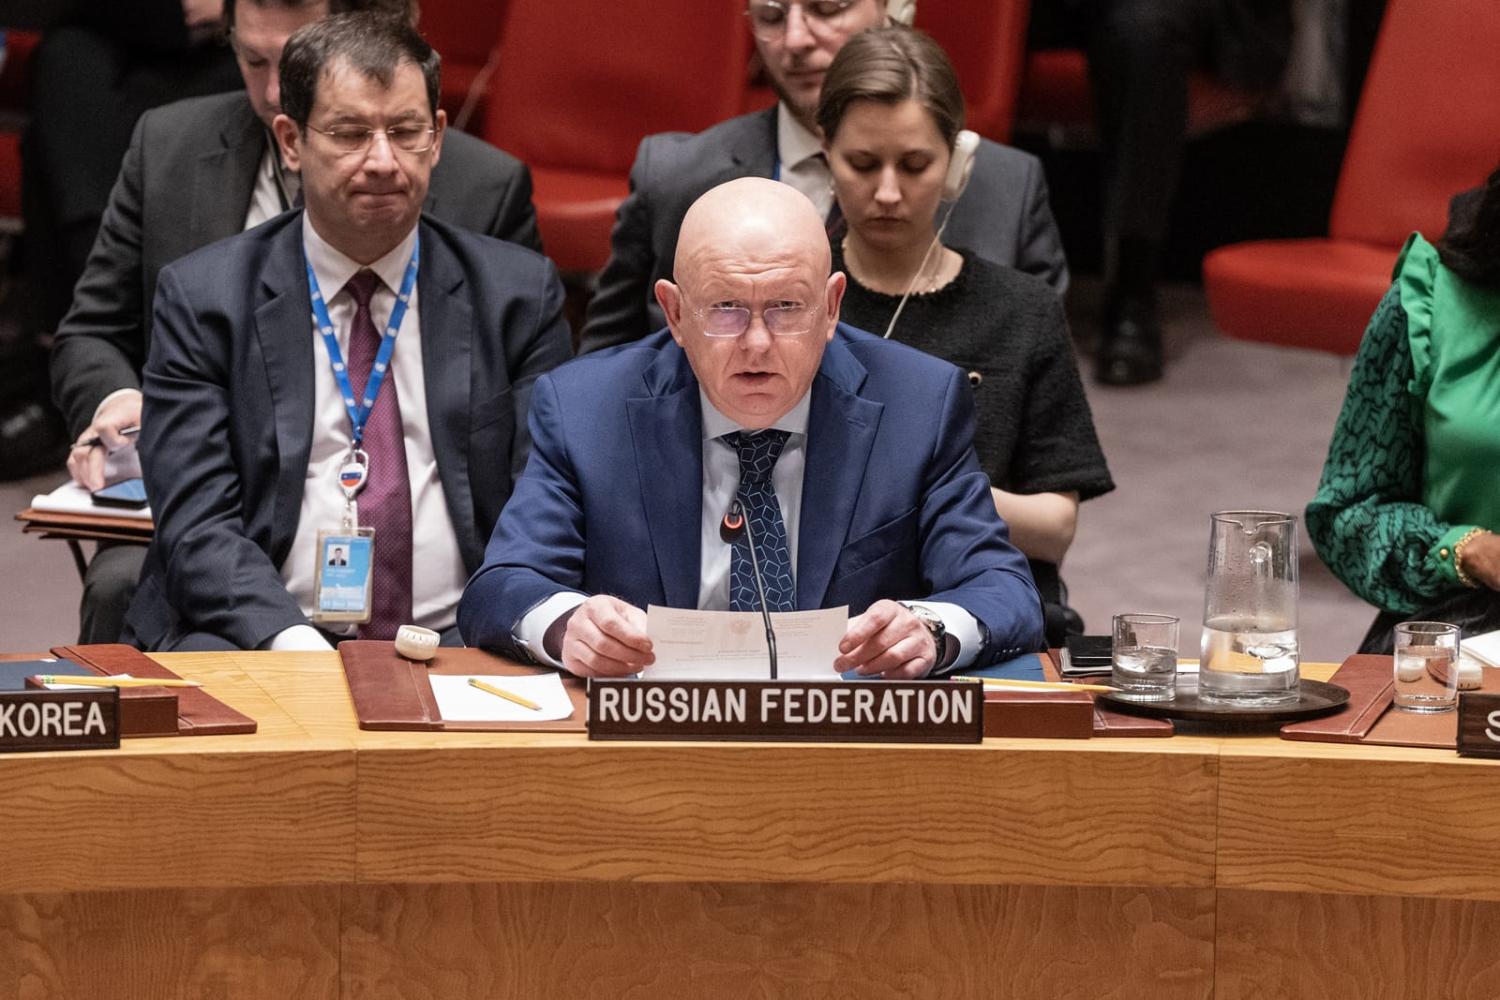 Ambassador Vassily Nebenzia of Russia at a Security Council meeting: he has unceasingly pushed Putin’s narrative since the day Russia’s tanks rolled into Ukraine’s territory (Lev Radin via Getty Images)